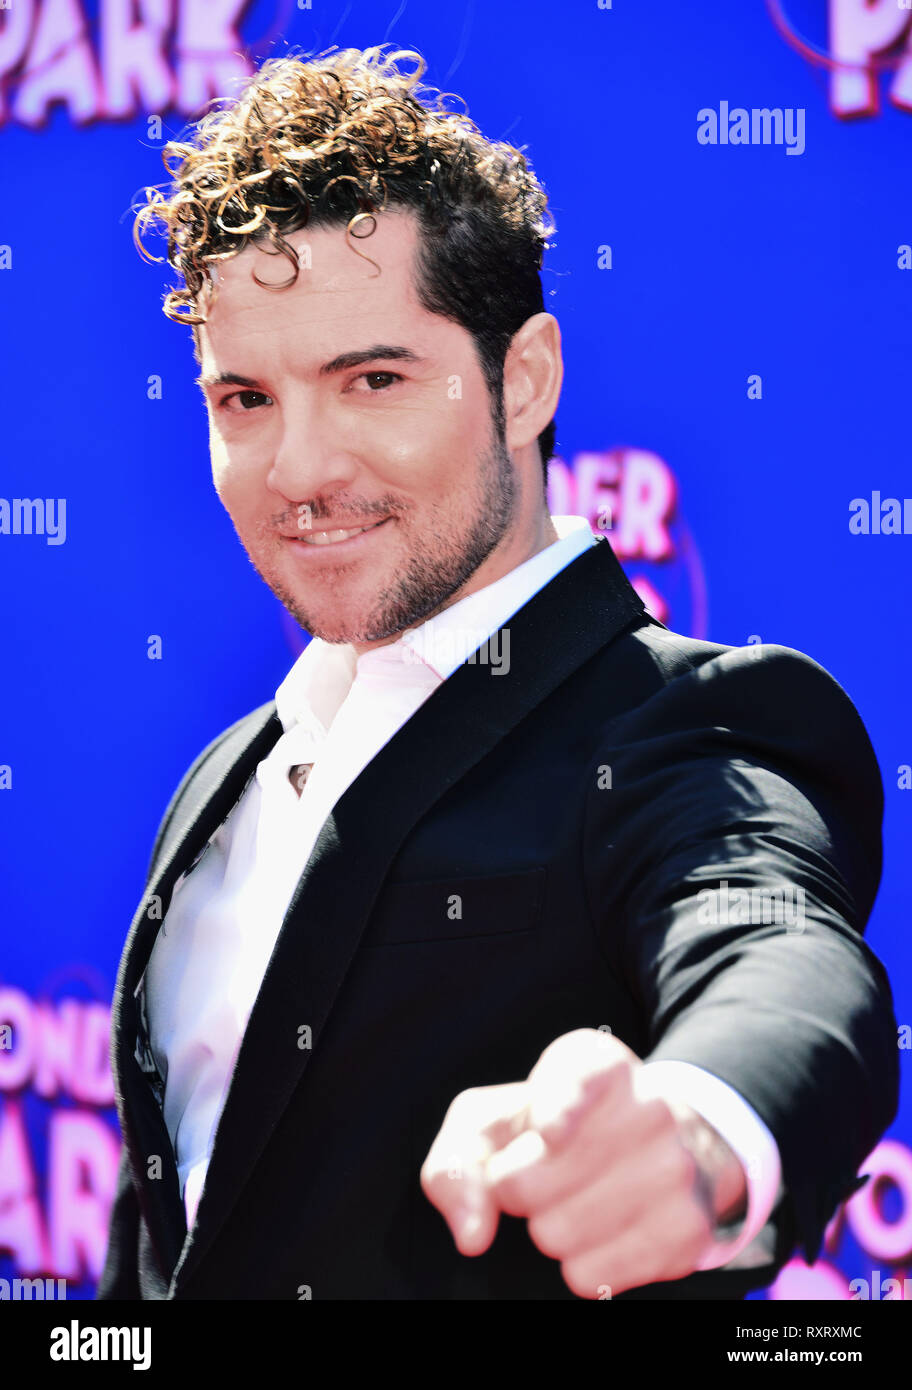 Los Angeles, USA. 10th Mar, 2019. David Bisbal 029 attends the premiere of Paramount Pictures' 'Wonder Park' at Regency Bruin Theatre on March 10, 2019 in Los Angeles, California. Credit: Tsuni/USA/Alamy Live News Stock Photo